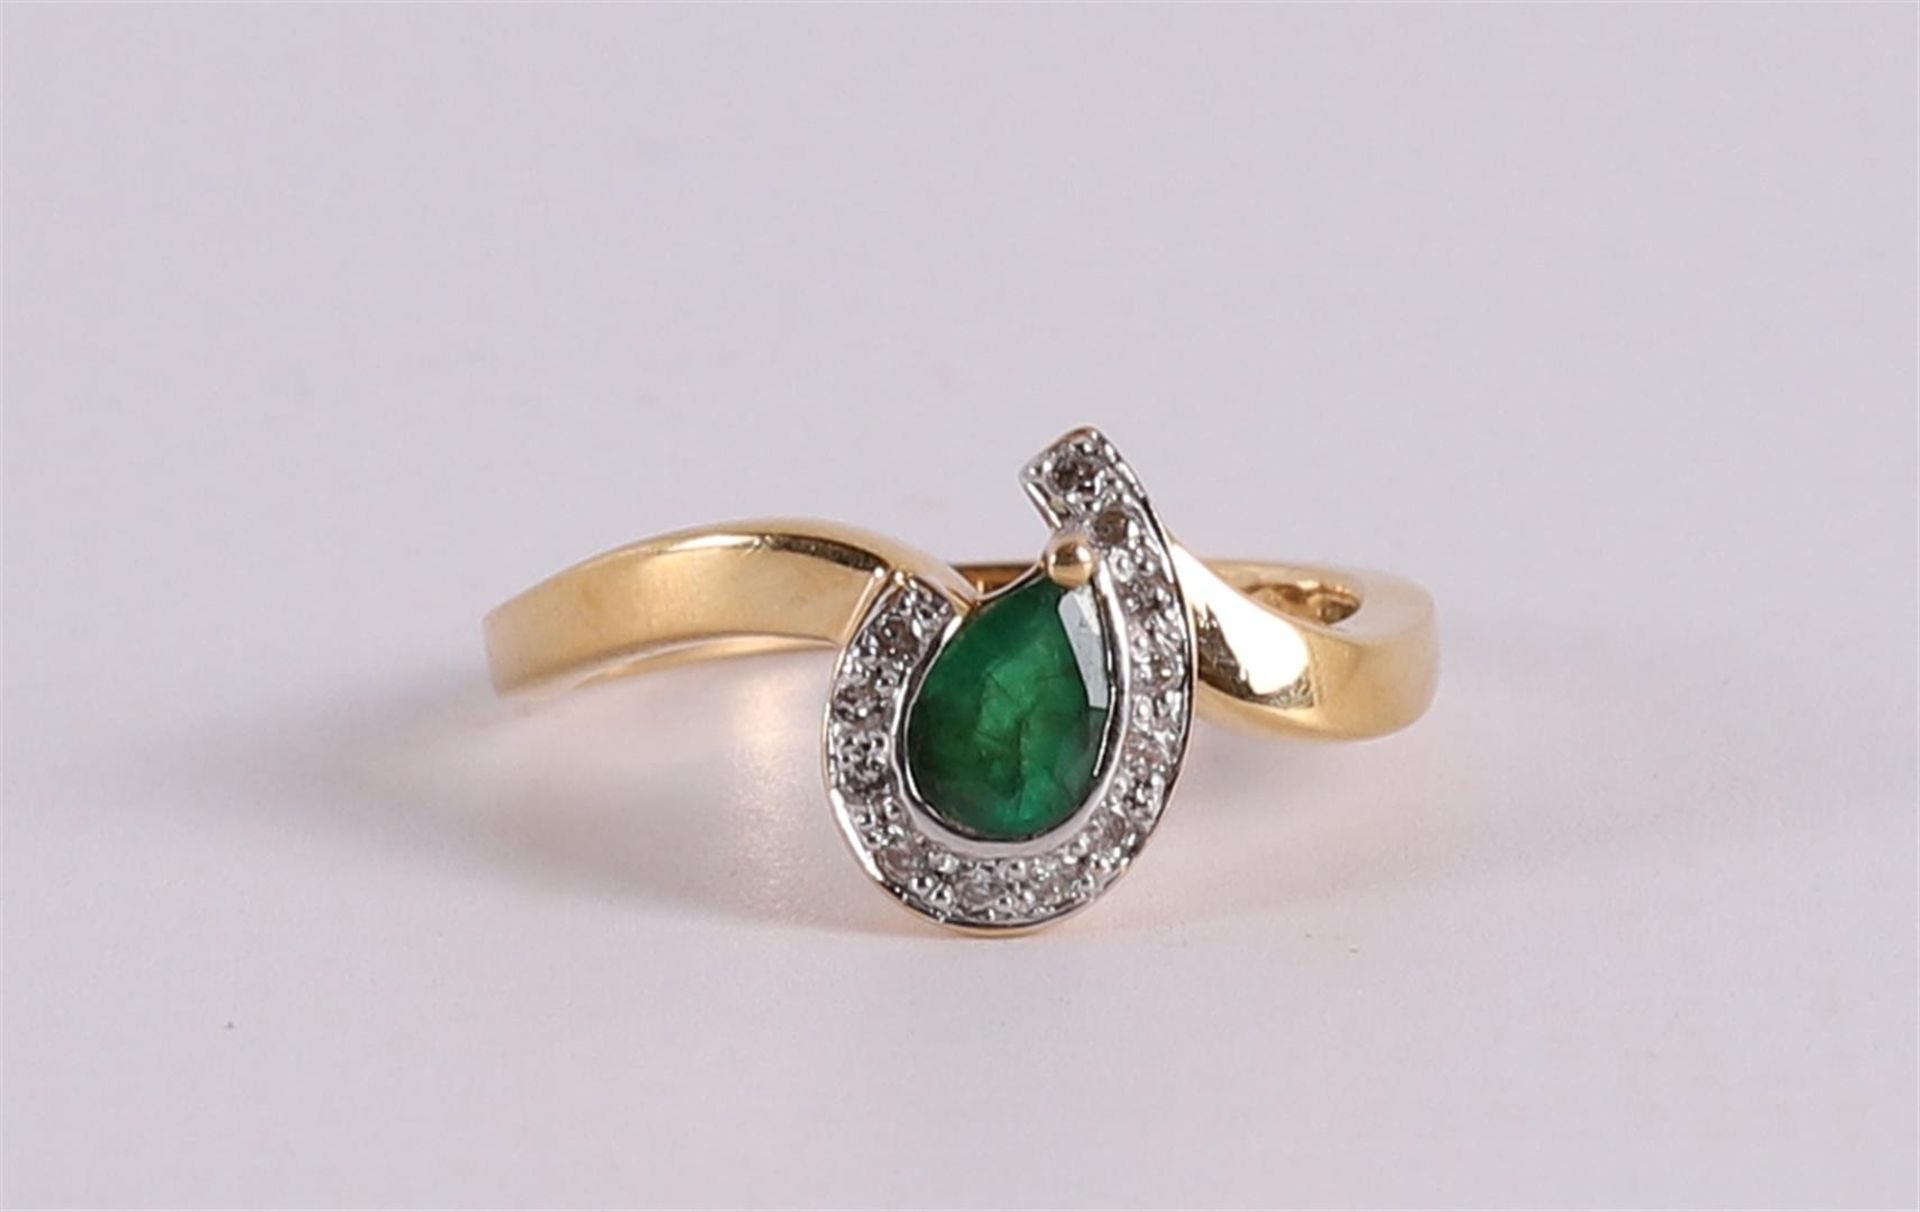 An 18 carat gold ring with an emerald flanked by 12 diamonds